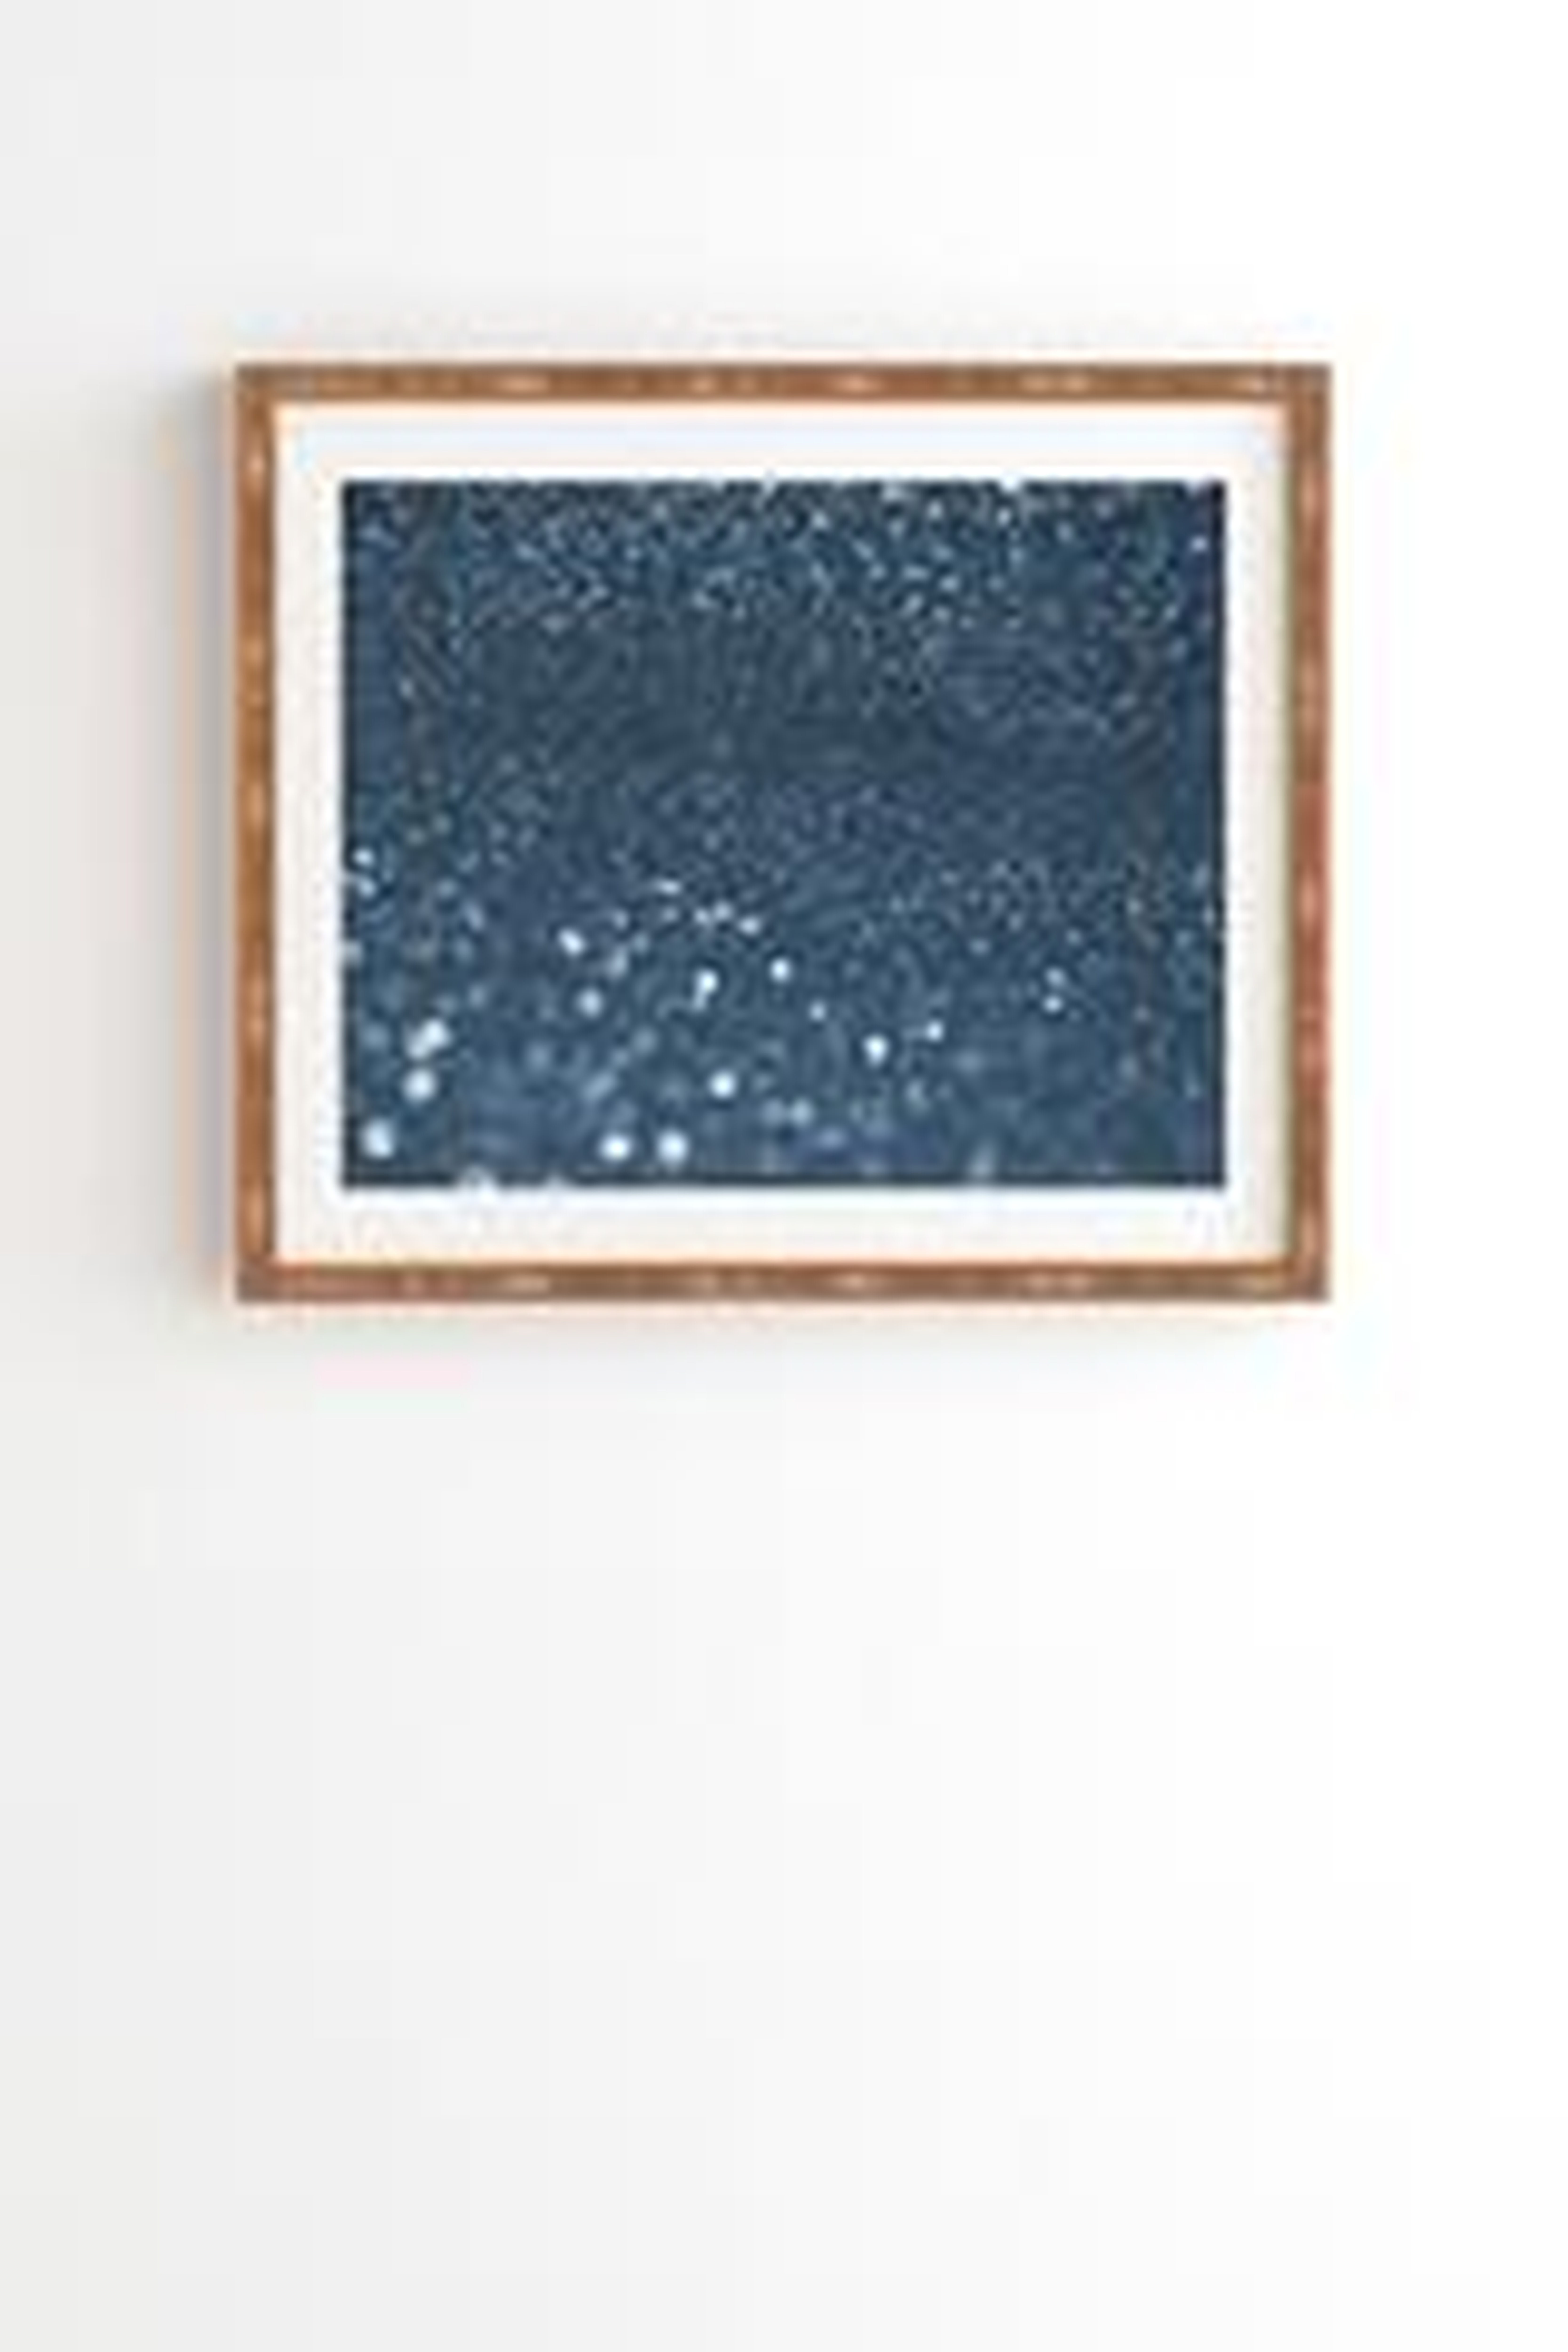 BUBBLY BLUES -11x13- Framed (Weathered Gray)-With mat - Wander Print Co.